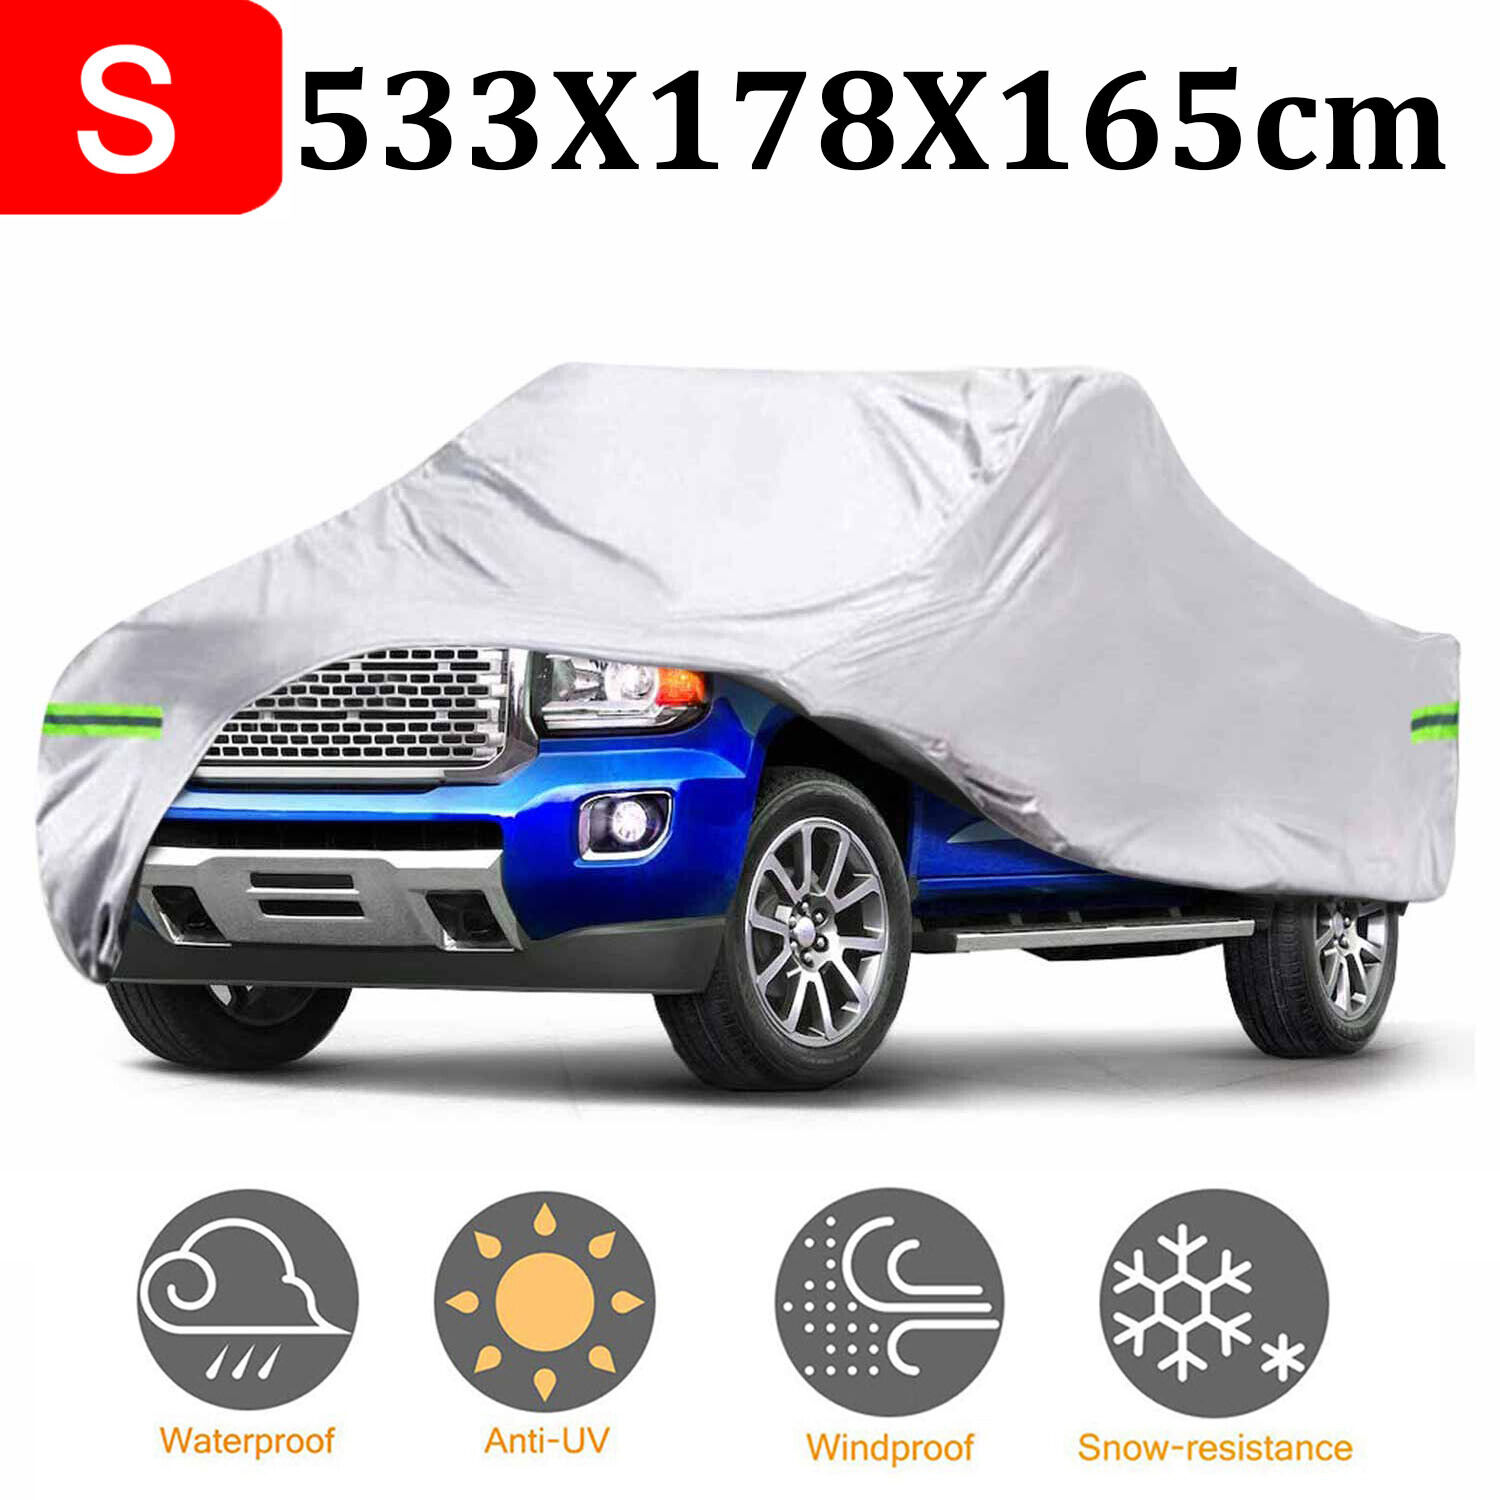 S~XL Pickup Truck Car Cover Waterproof UV Resistant Dust Rain Snow Protection